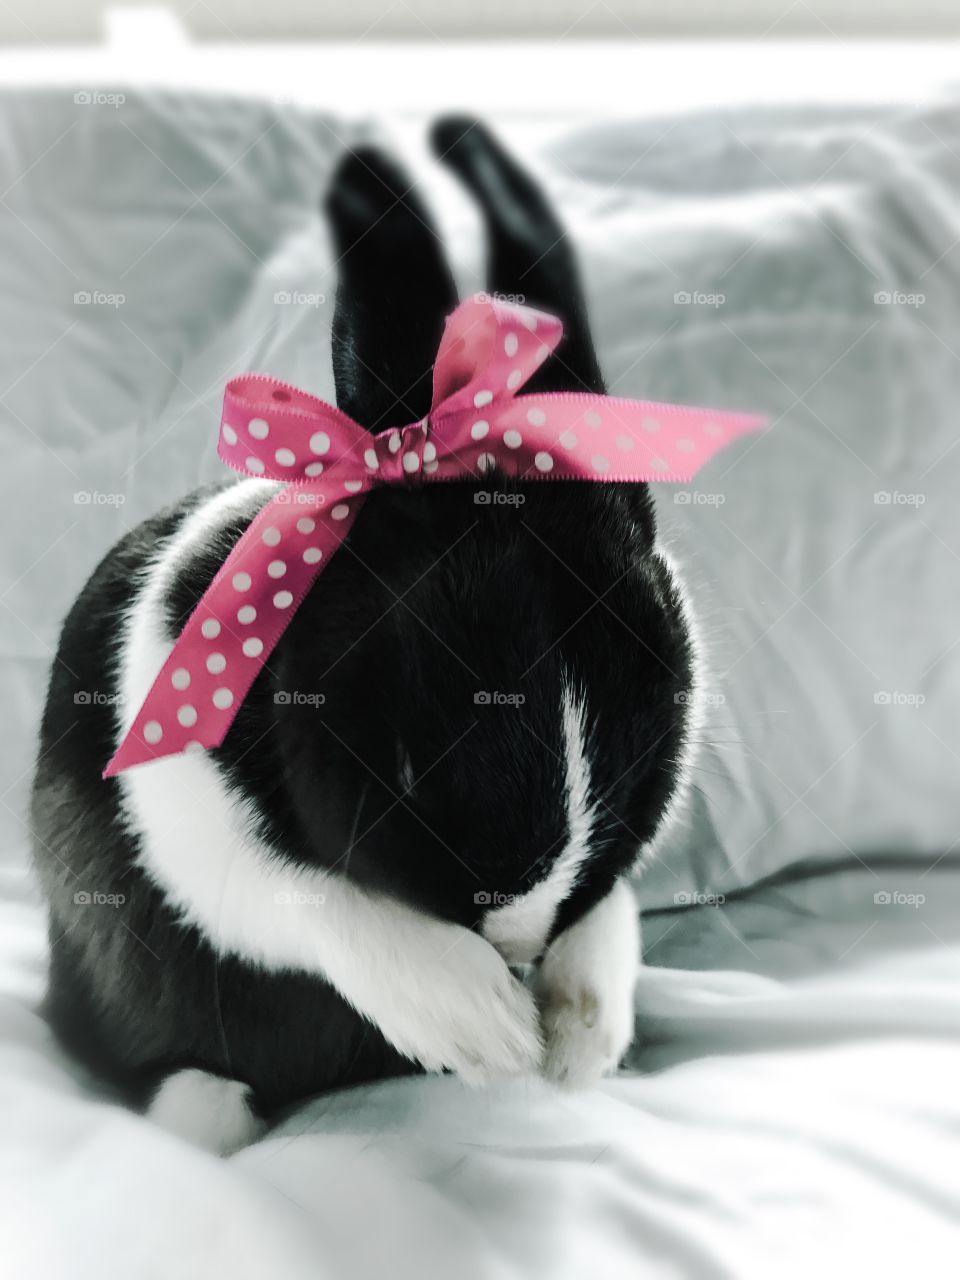 Bunny with bow tie